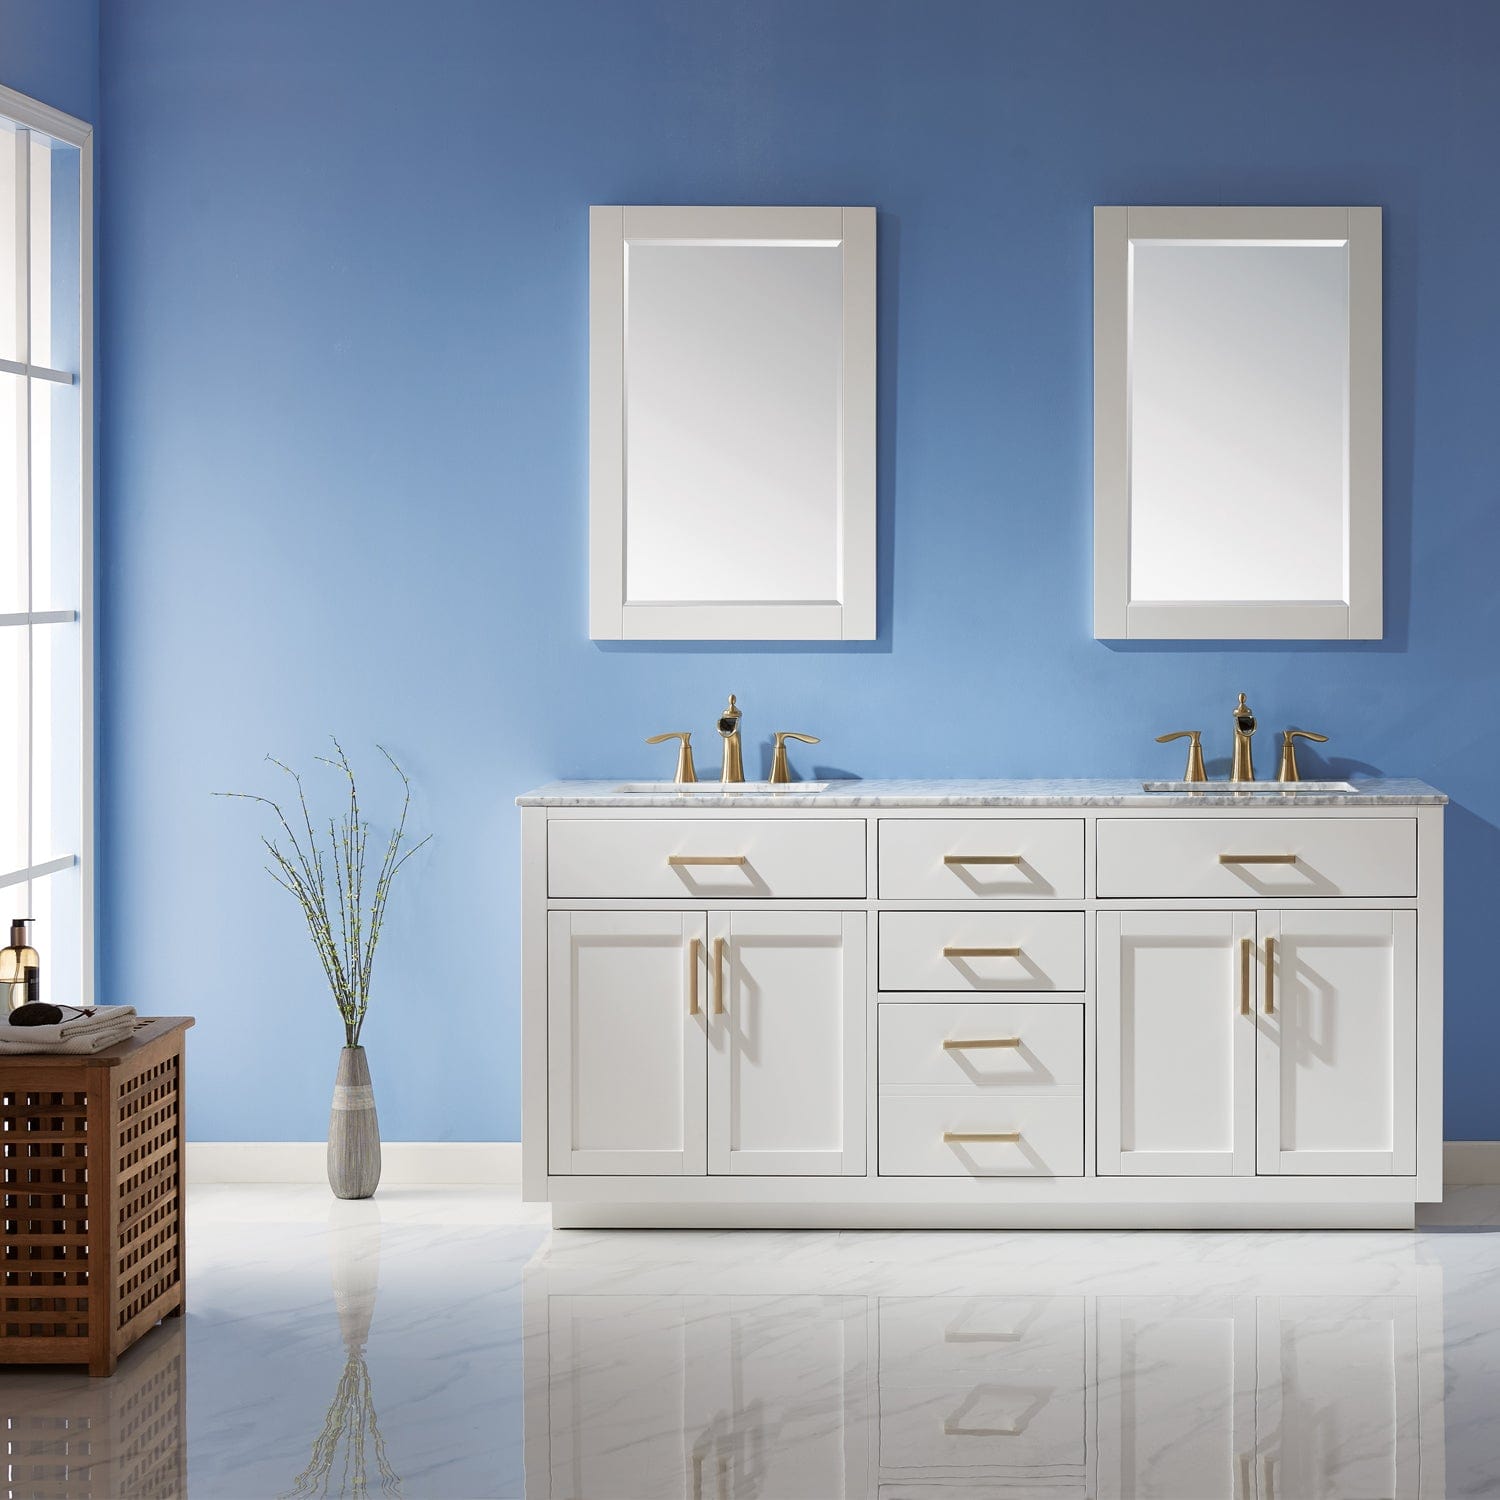 Altair Ivy 72" Double Bathroom Vanity Set in White and Carrara White Marble Countertop with Mirror 531072-WH-CA - Molaix631112971317Vanity531072-WH-CA